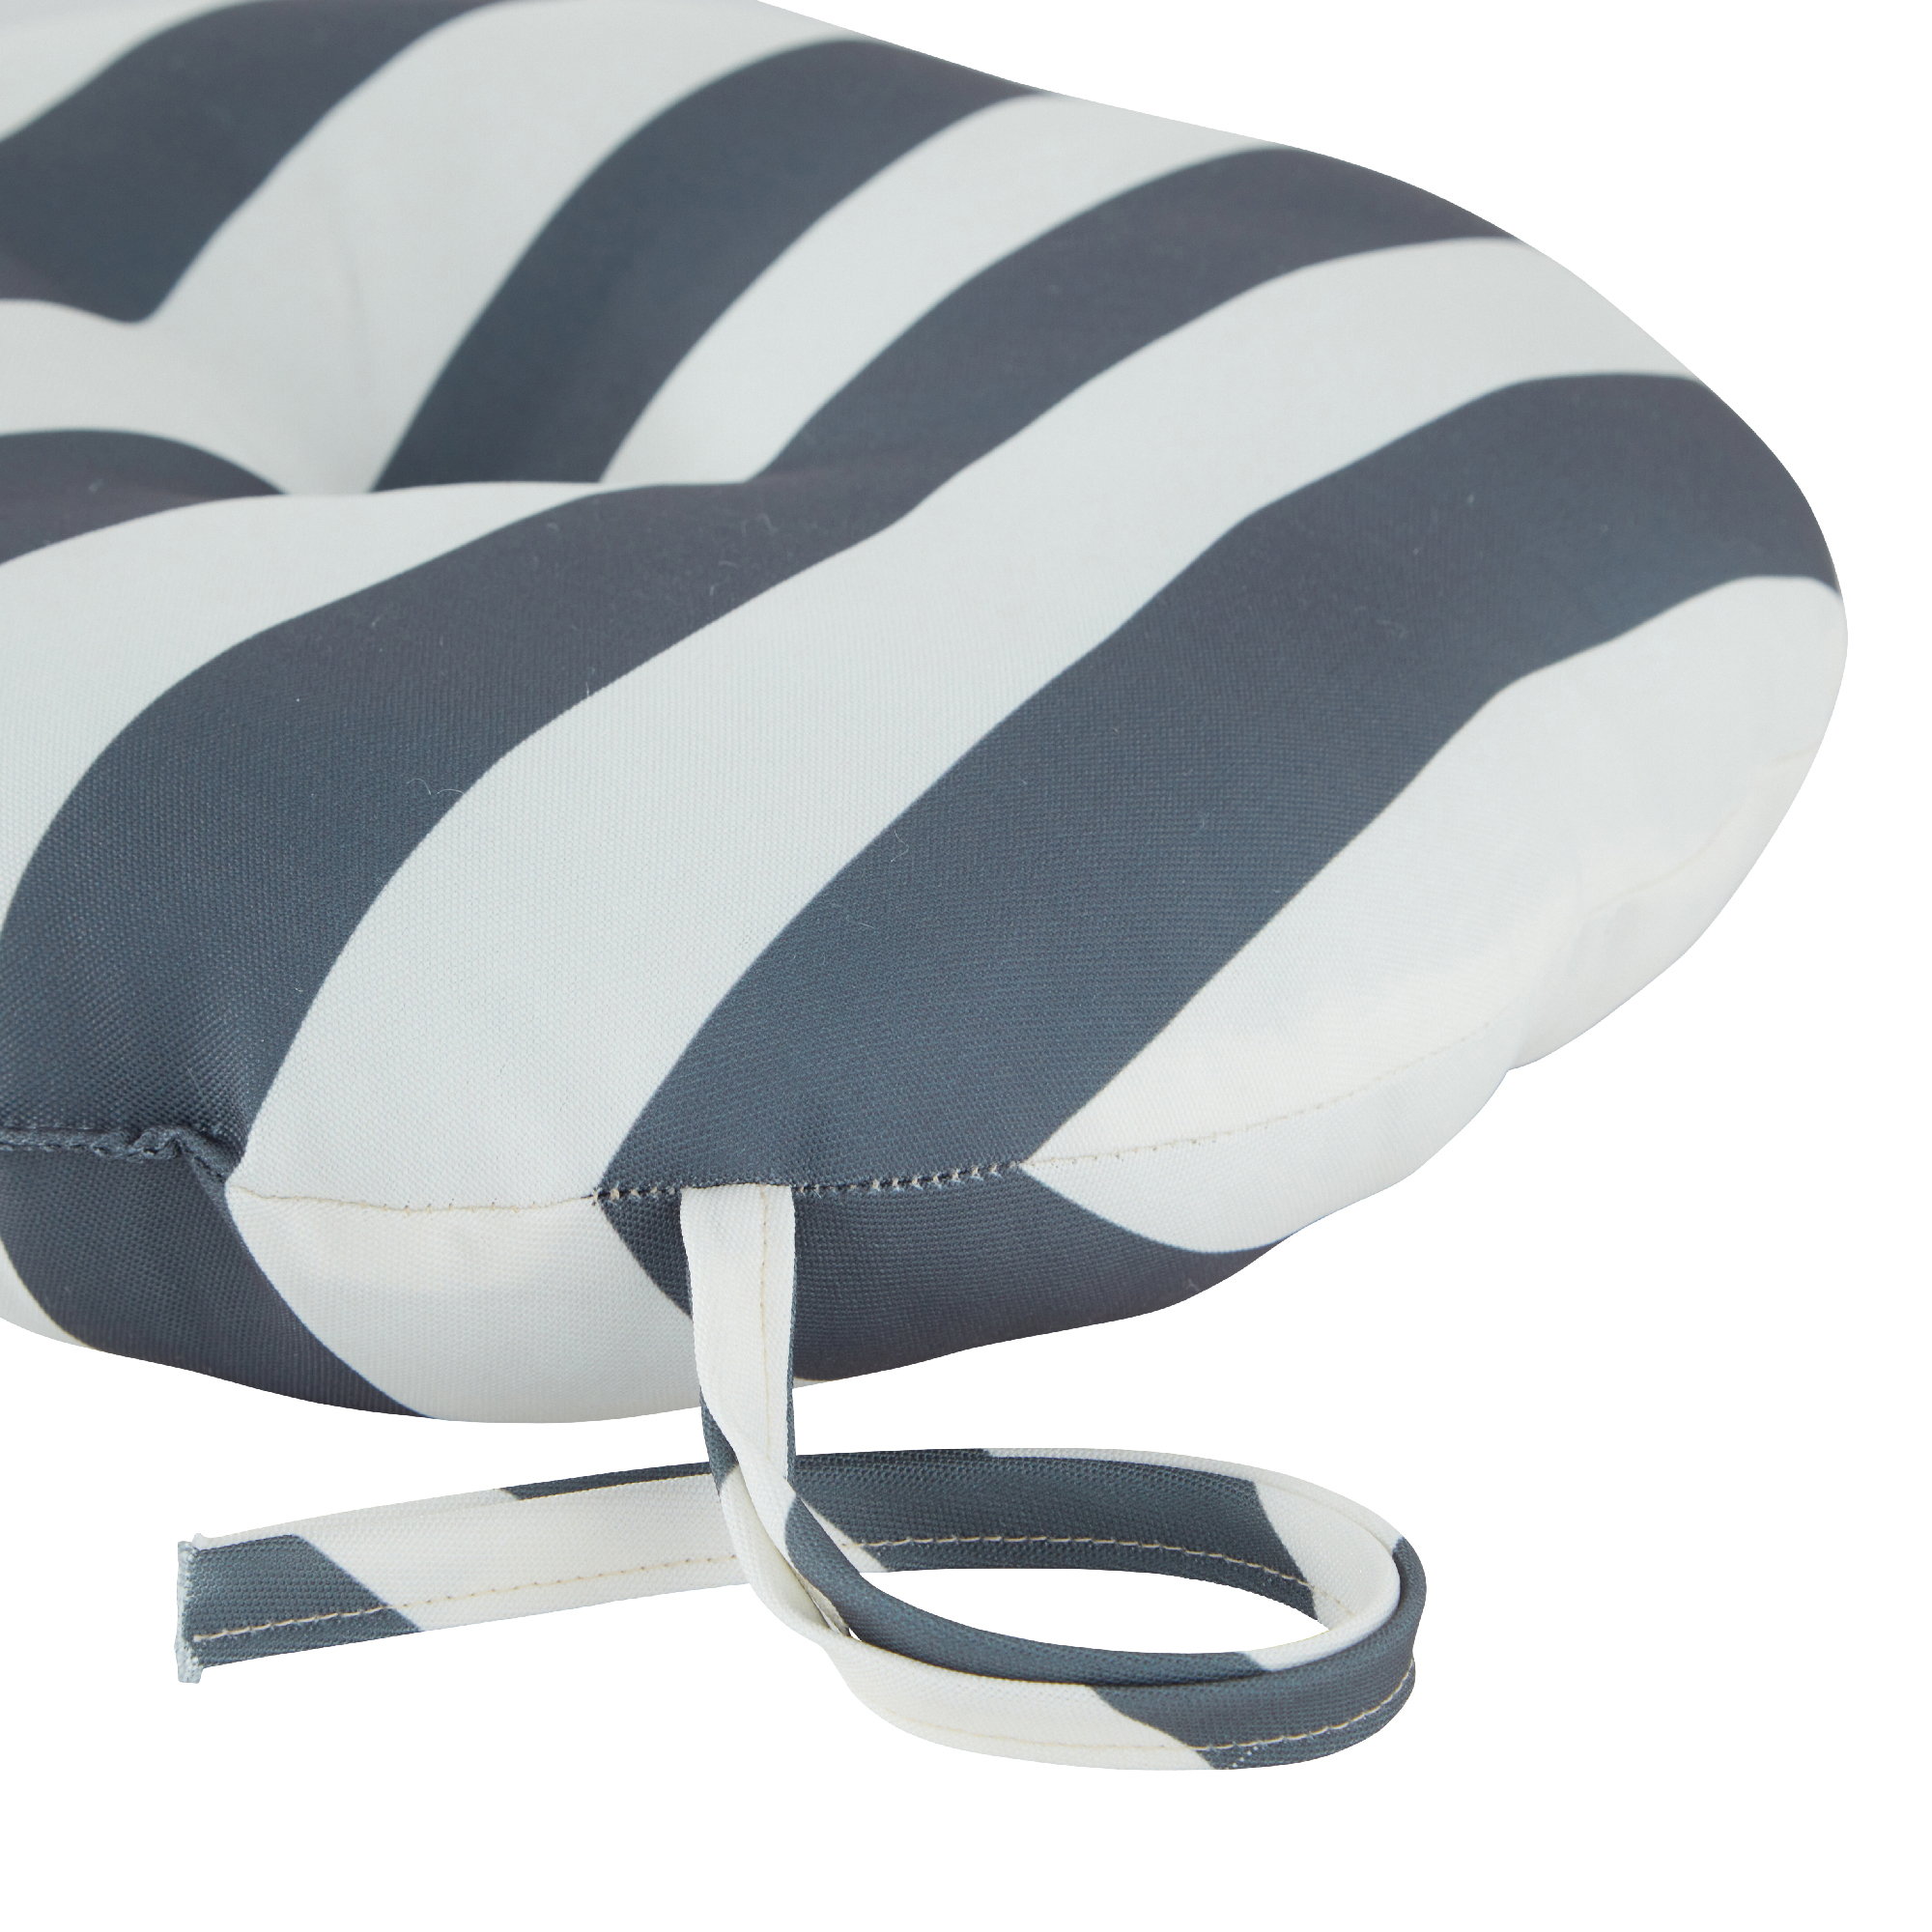 Greendale Home Fashions Canopy Stripe Gray 15 in. Round Outdoor Reversible Bistro Seat Cushion (Set of 2) - image 4 of 6